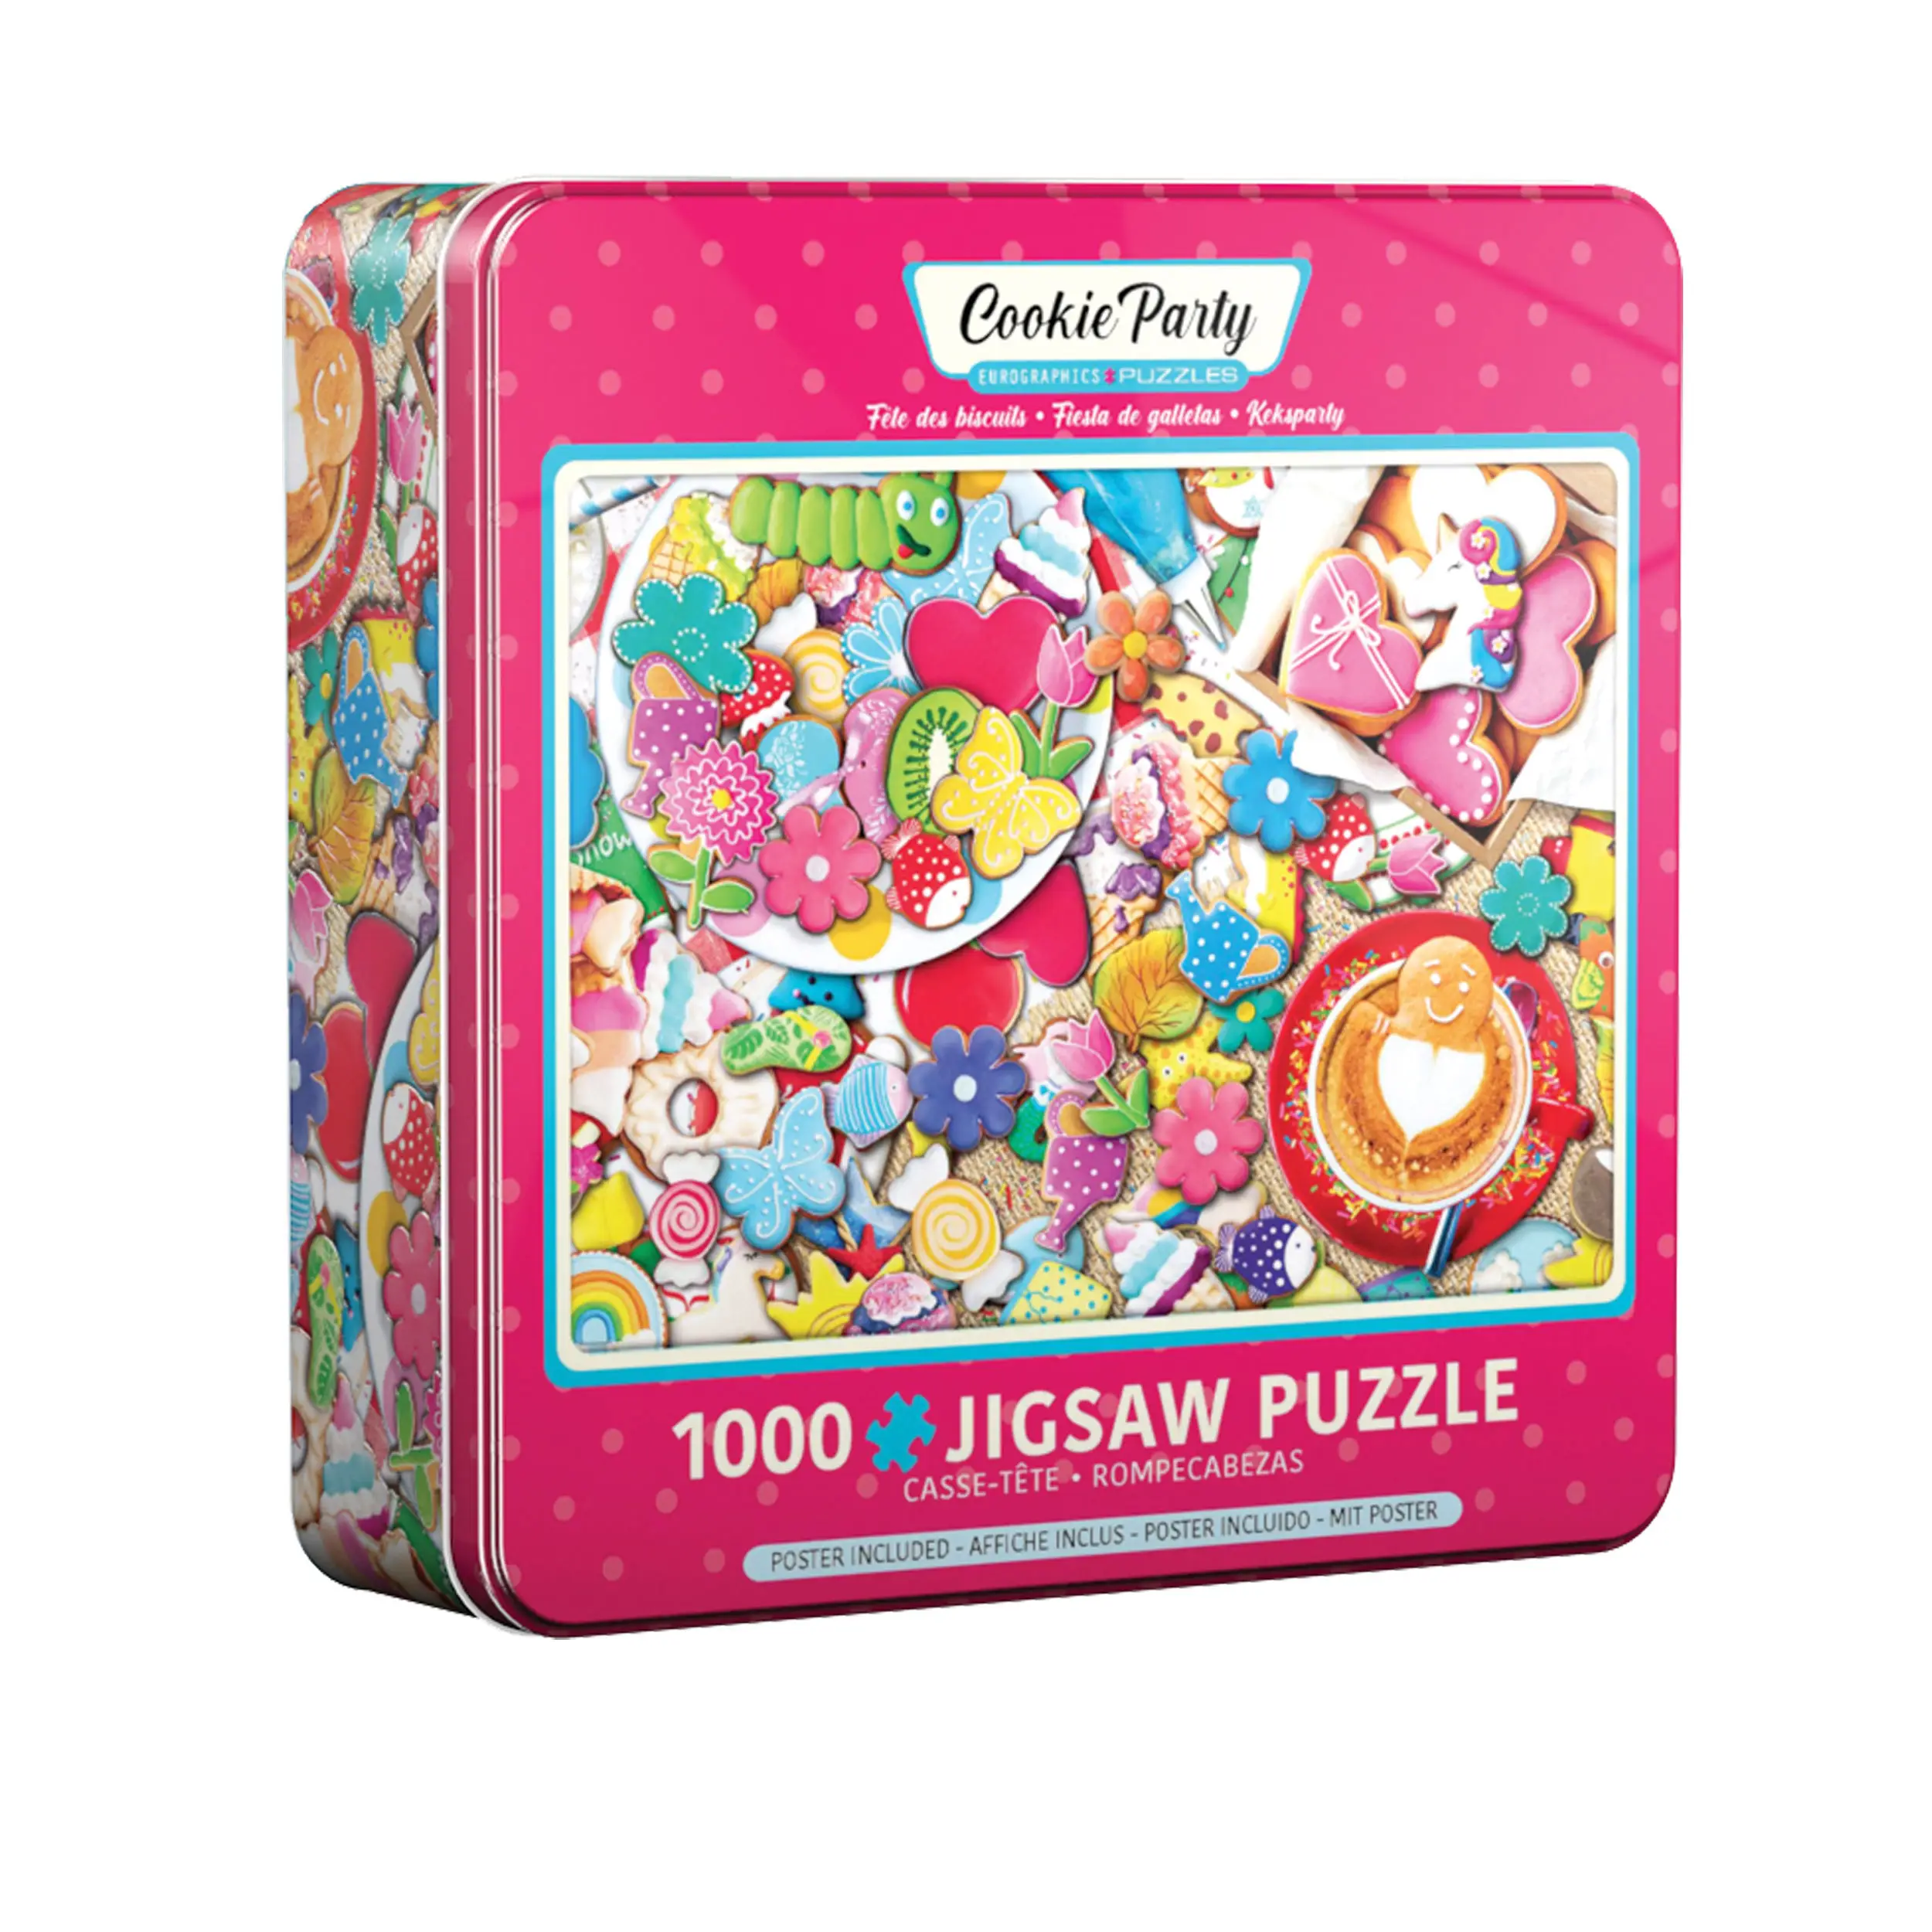 Puzzle Kekse Party in Puzzledose